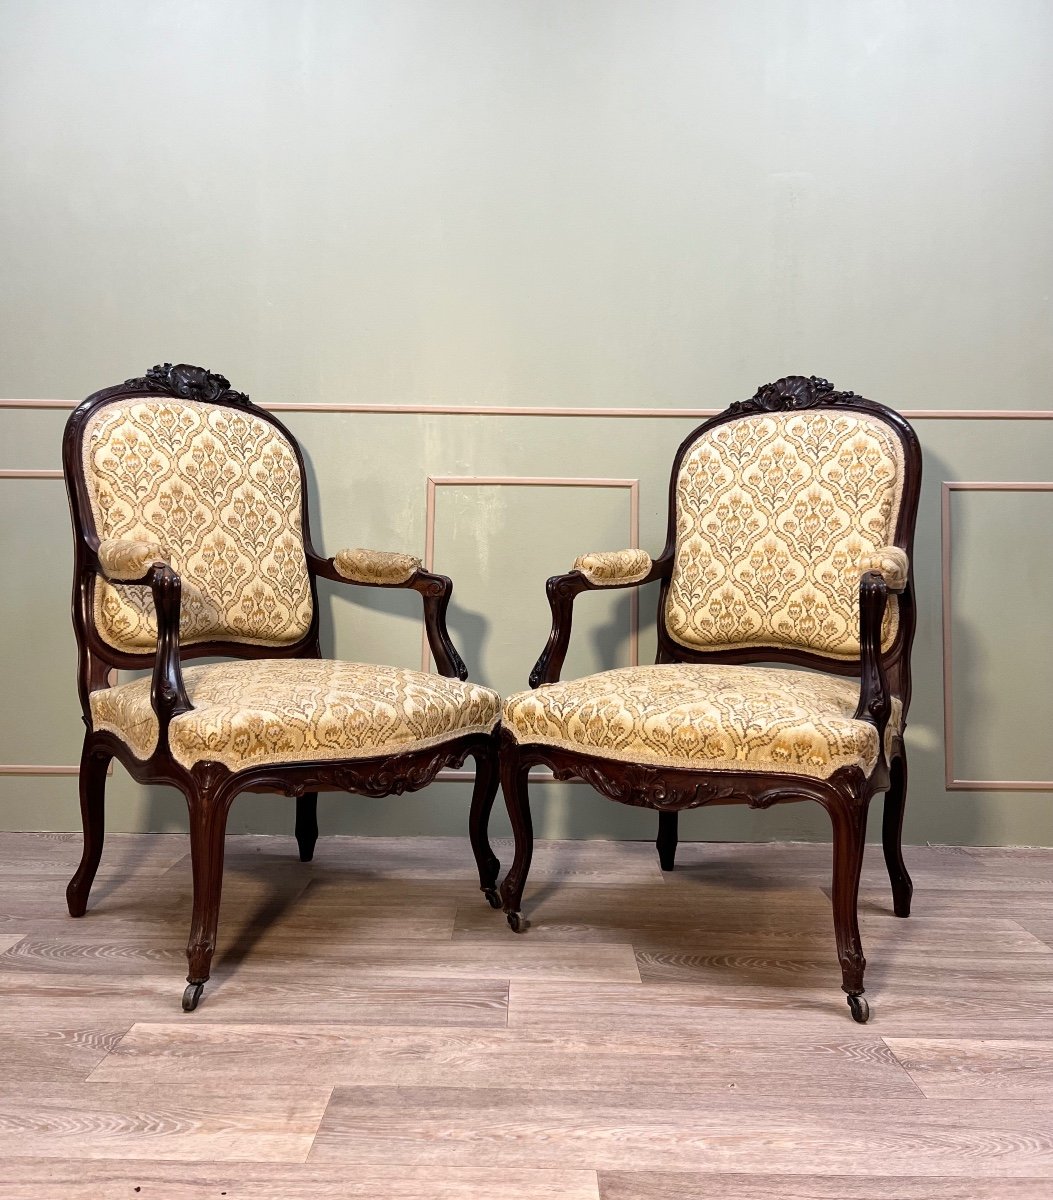 Pair Of Armchairs With Flat Backs In Regency Style 19th Century -photo-3